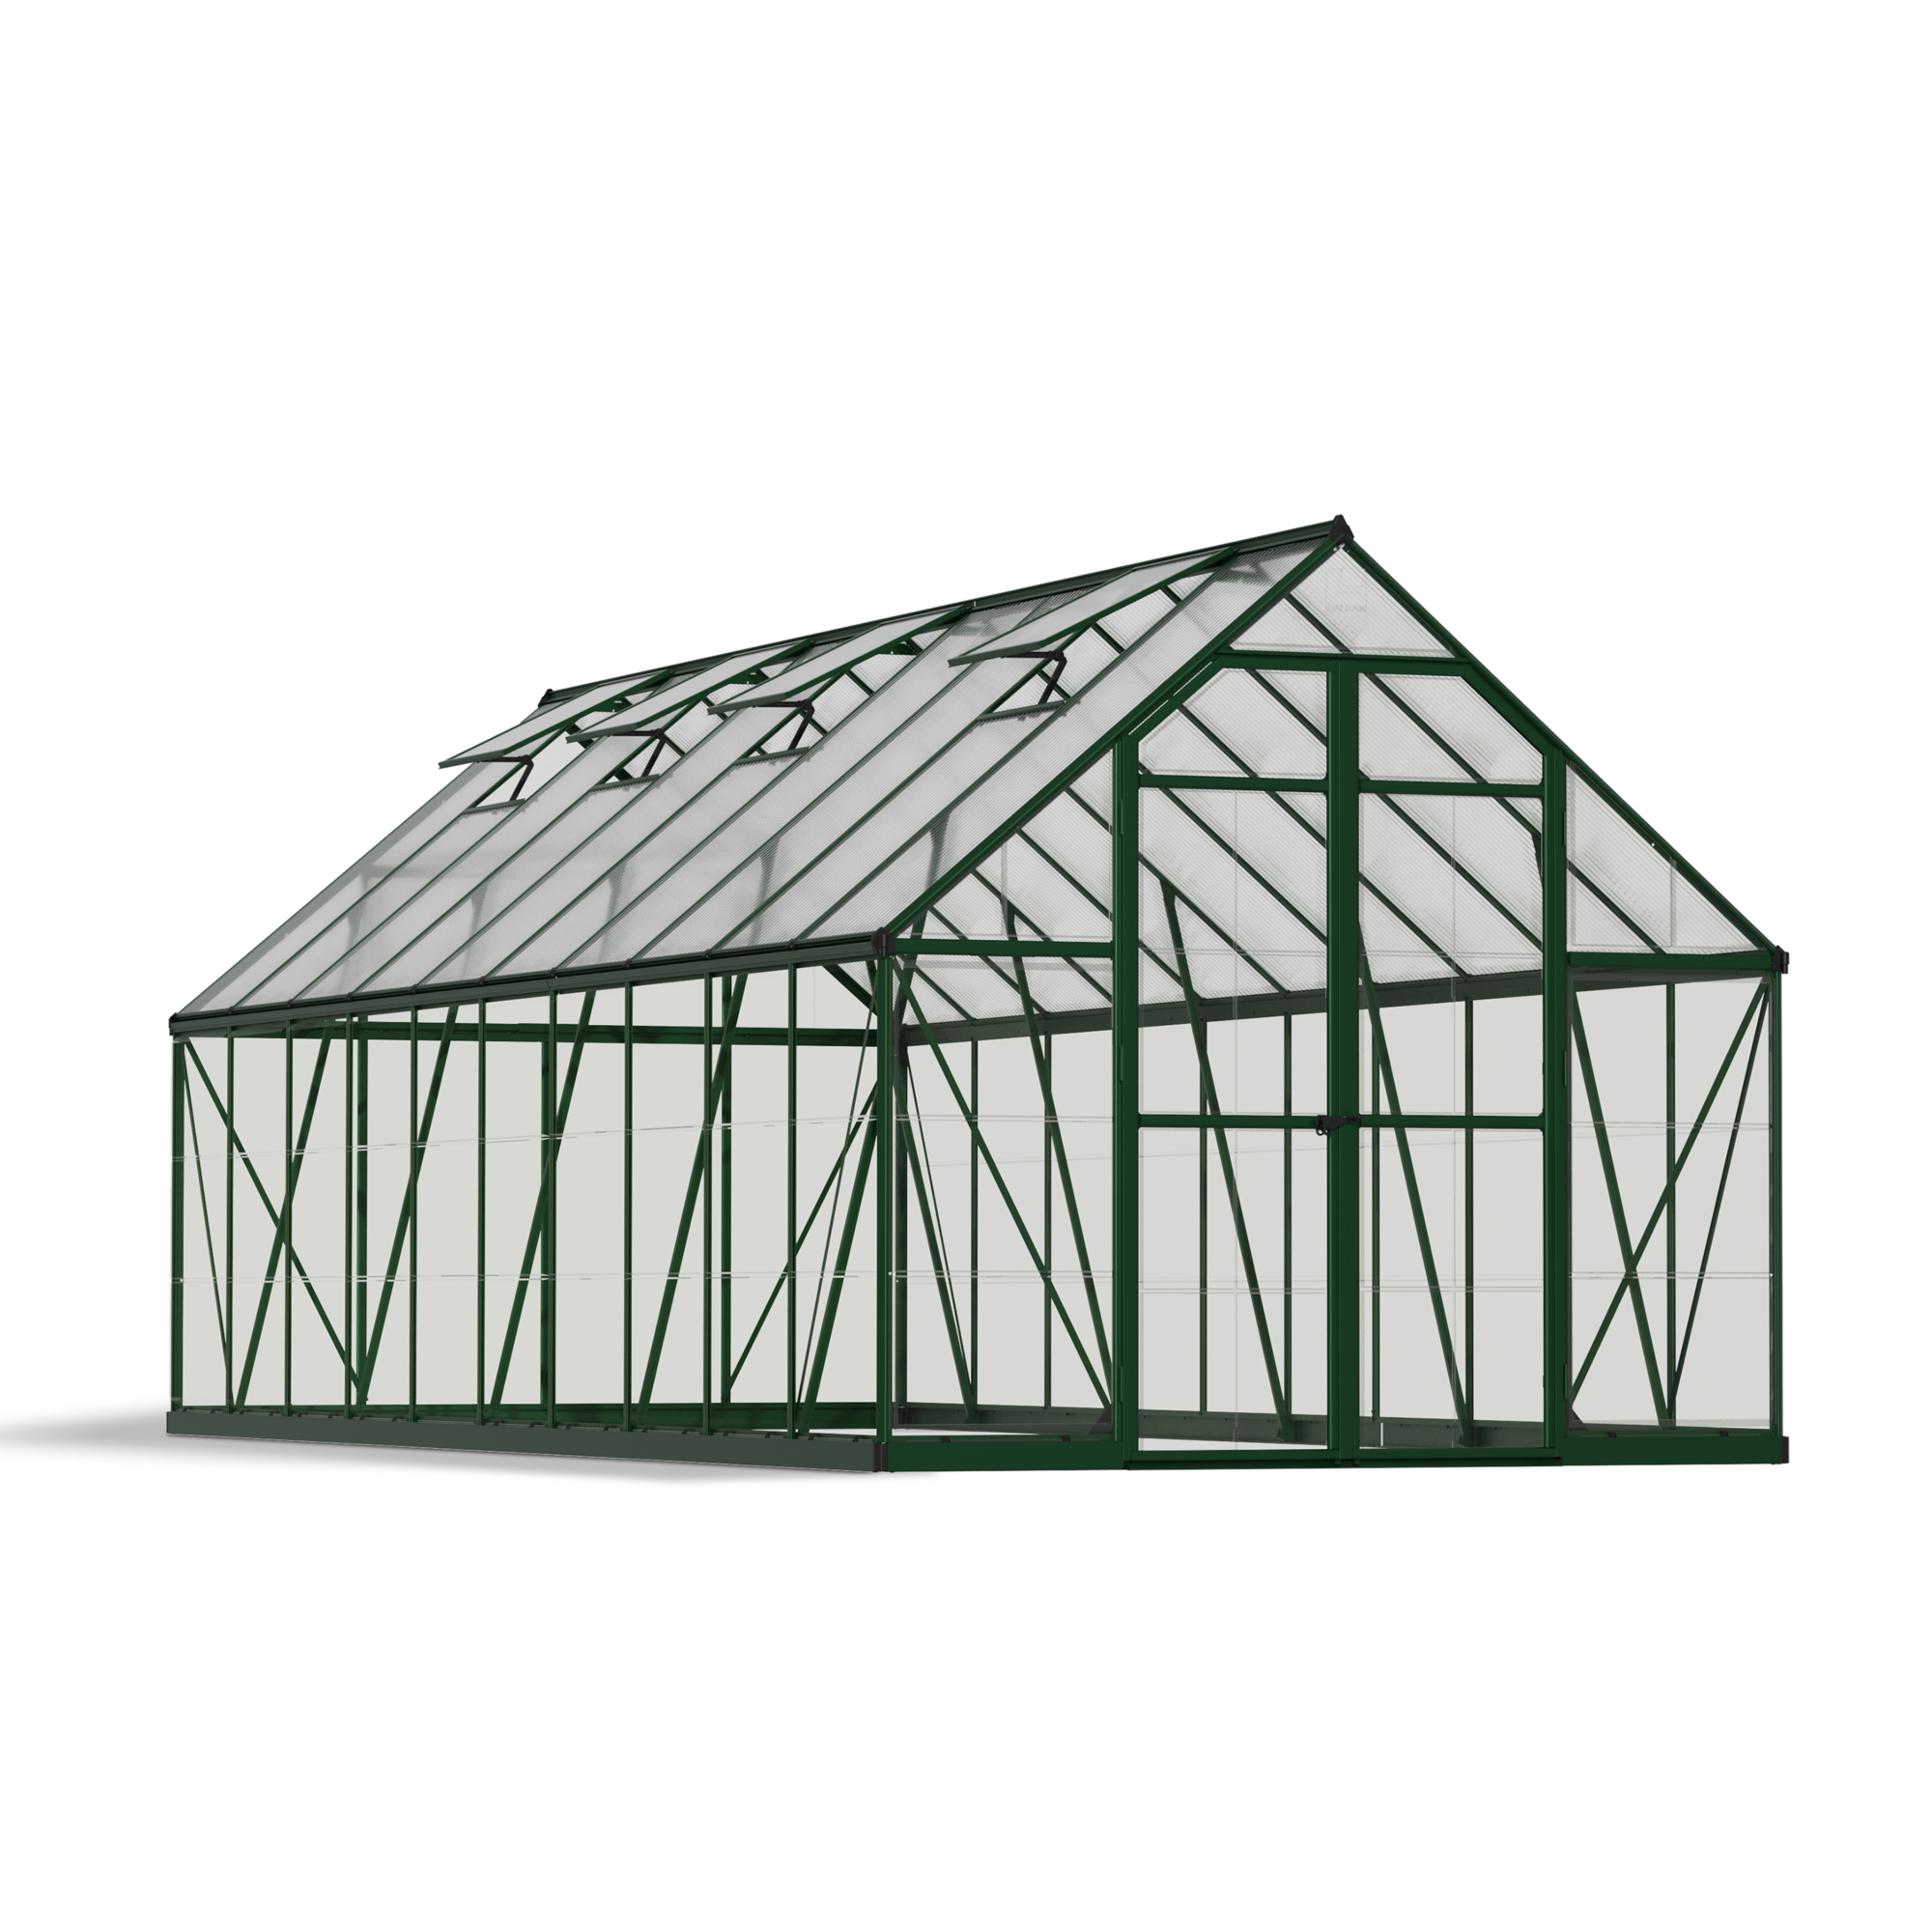 Poly-Tex Inc., Balance 8ft. x 20ft. Greenhouse - Green, Length 240 in, Width 96 in, Center Height 91 in, Model 703491